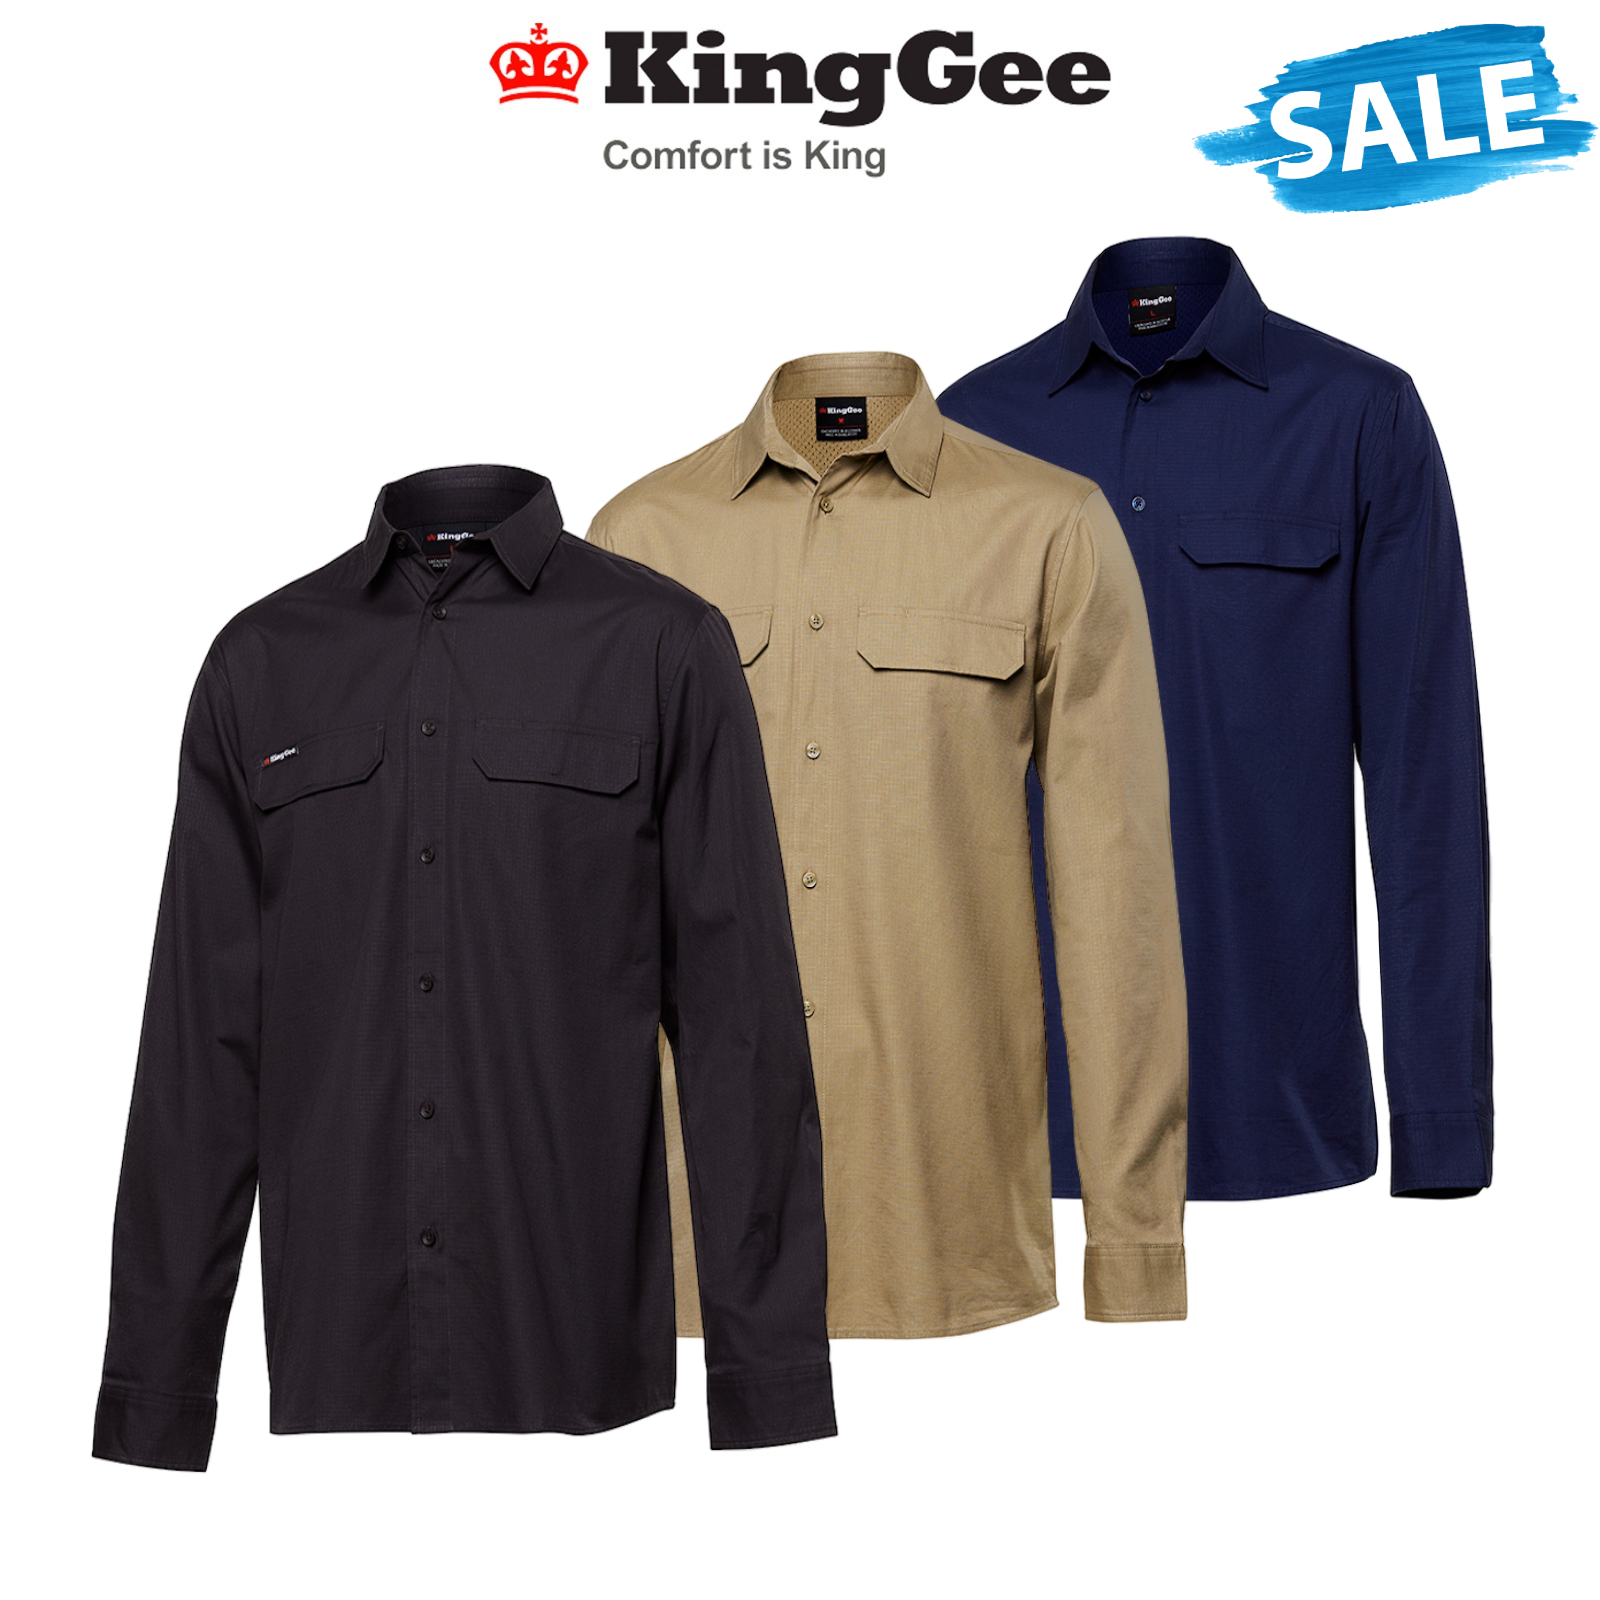 55% OFF SALE KingGee Workcool Pro Sales for sale Shirt Long Sleeve Stretch Dura Ripstop